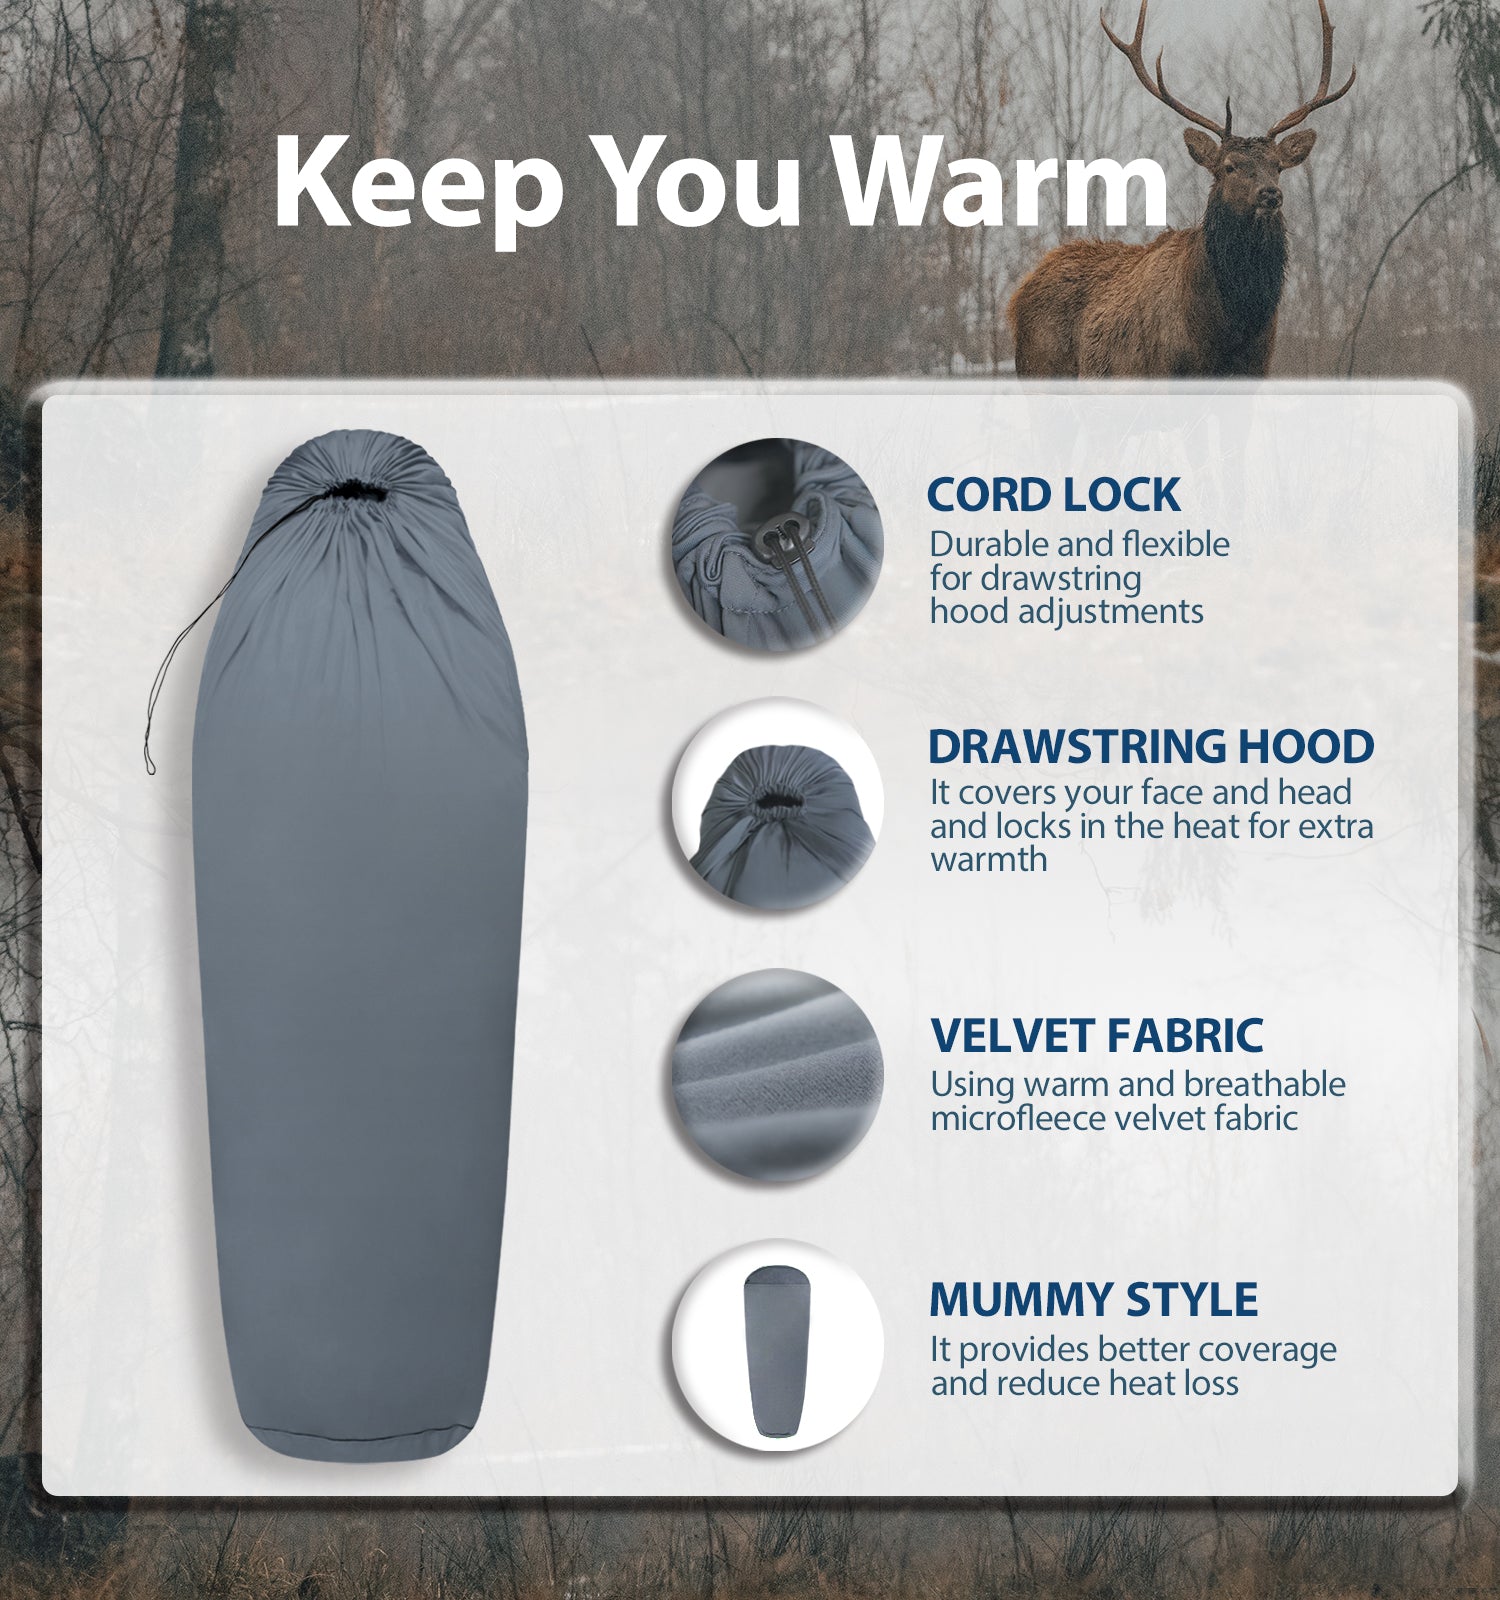 E625 Velvet Fleece mummy Sleeping Bag Liner Add Up to 14F 8C warmth Litume cold weather lightweight compact portable with zipper zipped half zip small size winter hiking camping backpacking backpacker travel hotel train airplane hostal ykkk zipper drawstring hood hooded footbox